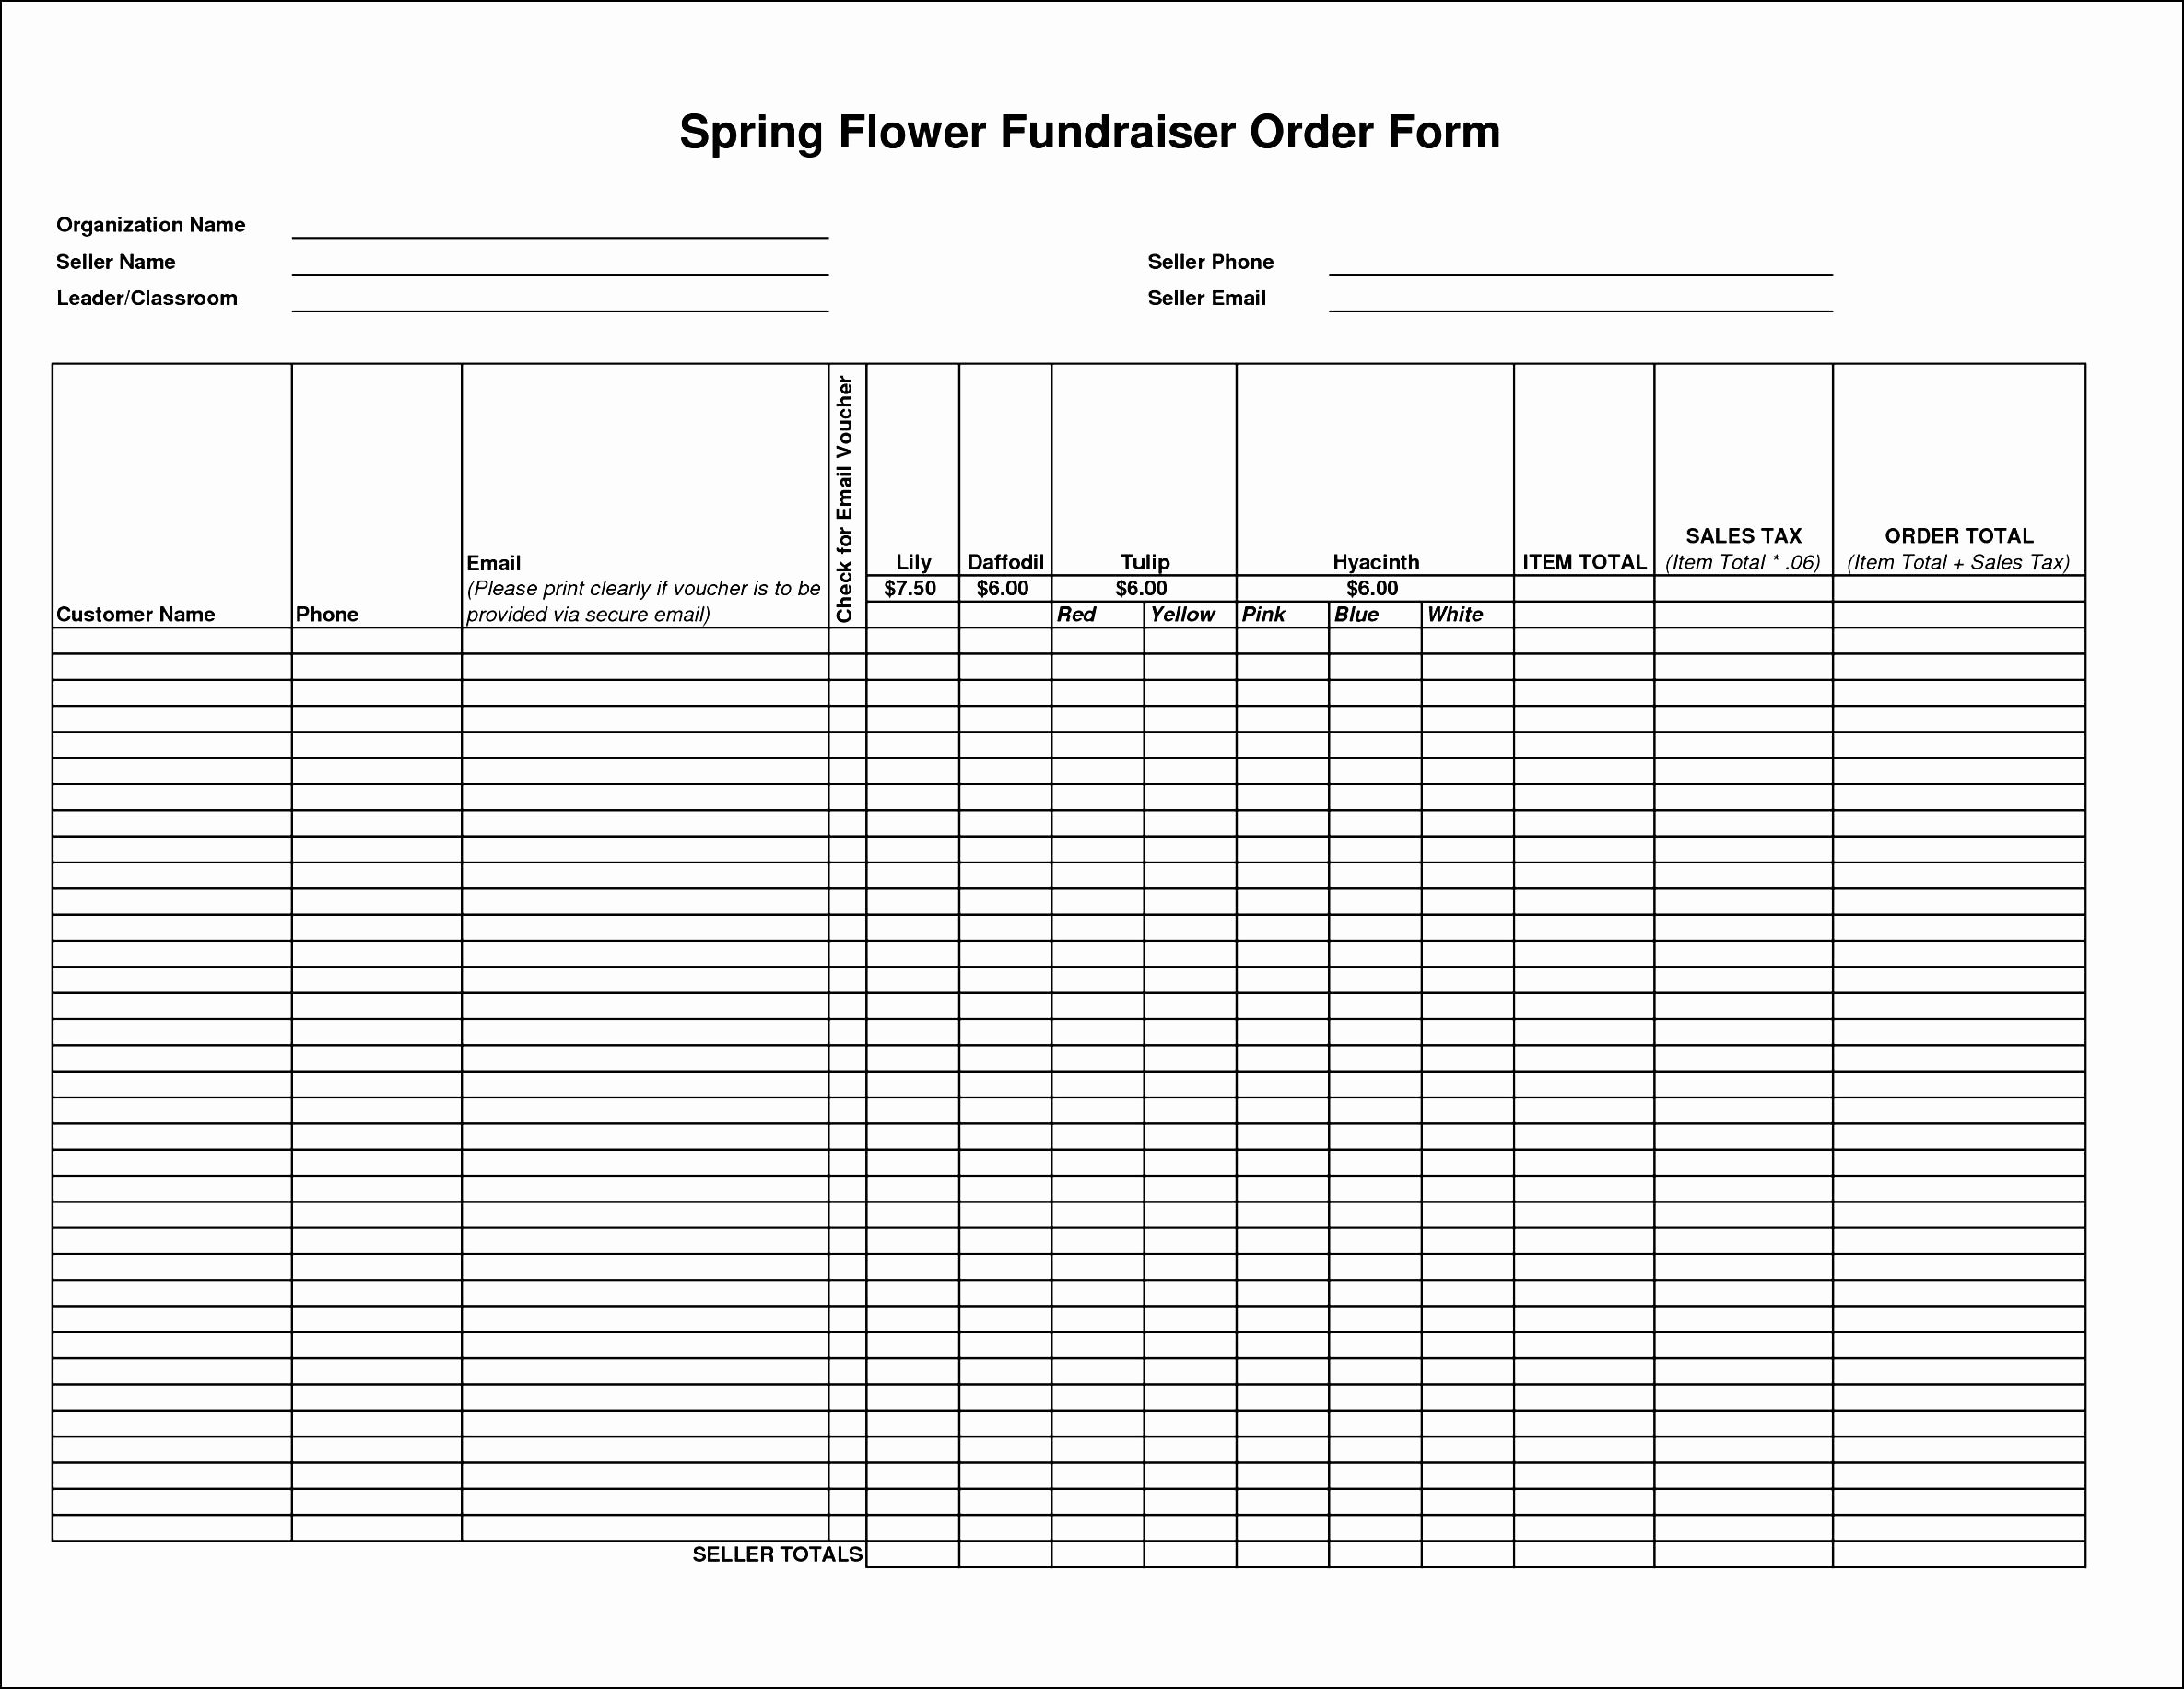 Fundraiser form Template Free Lovely Collection solutions Flower Fundraiser order forms